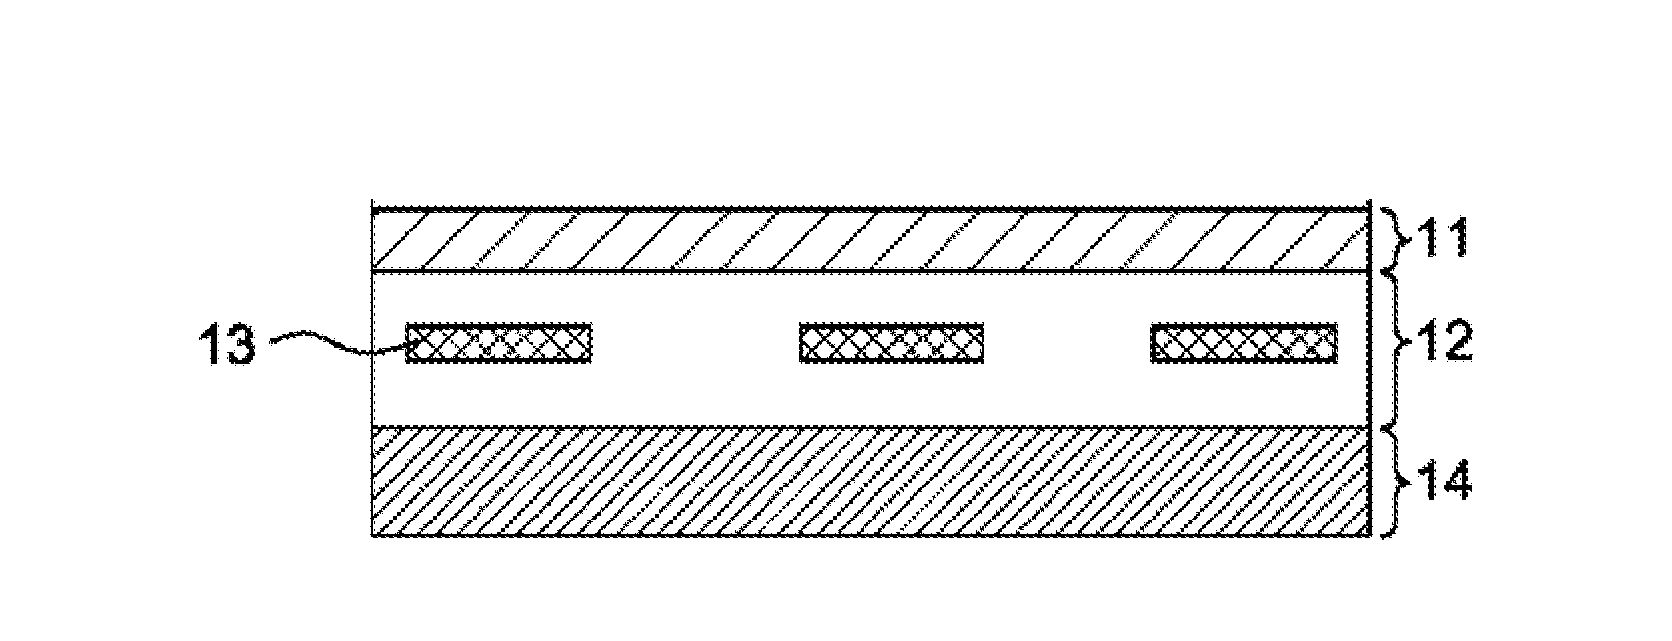 Packaging material for solar cell module and uses thereof